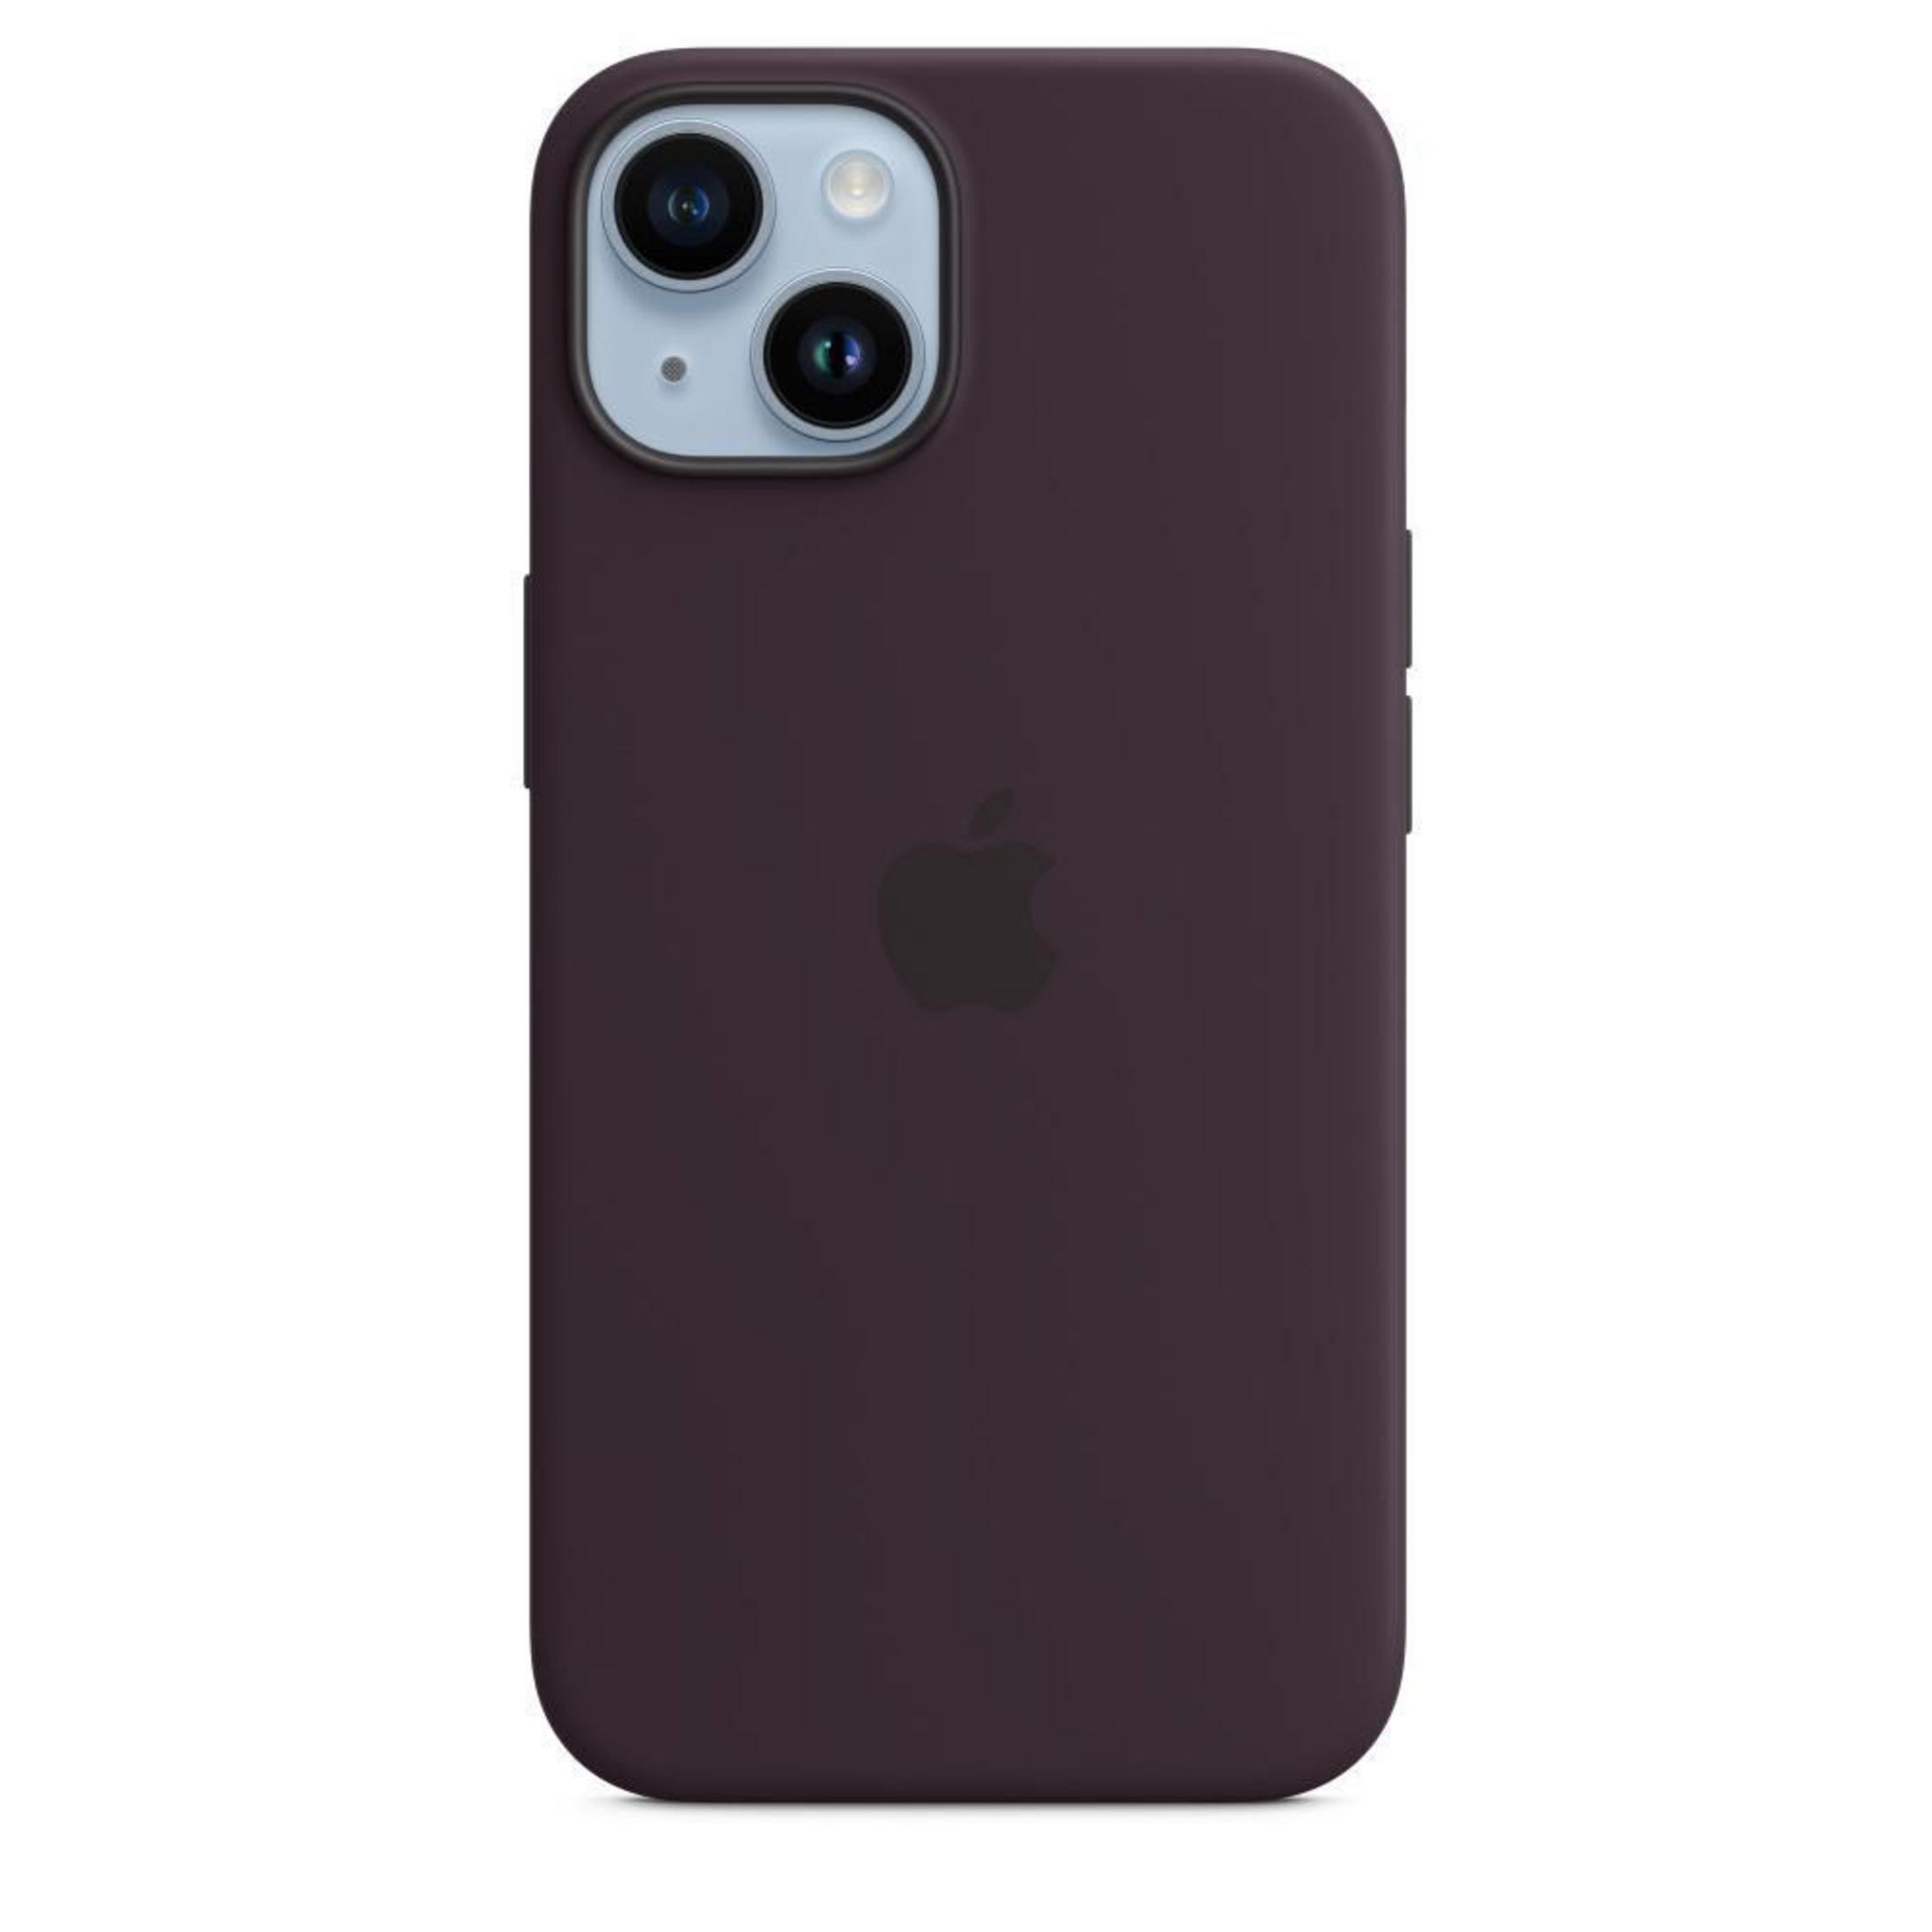 APPLE MPT03ZM/A IP SIL 14, ELDERBERRY, iPhone Backcover, CASE 14 Holunder - MS Apple